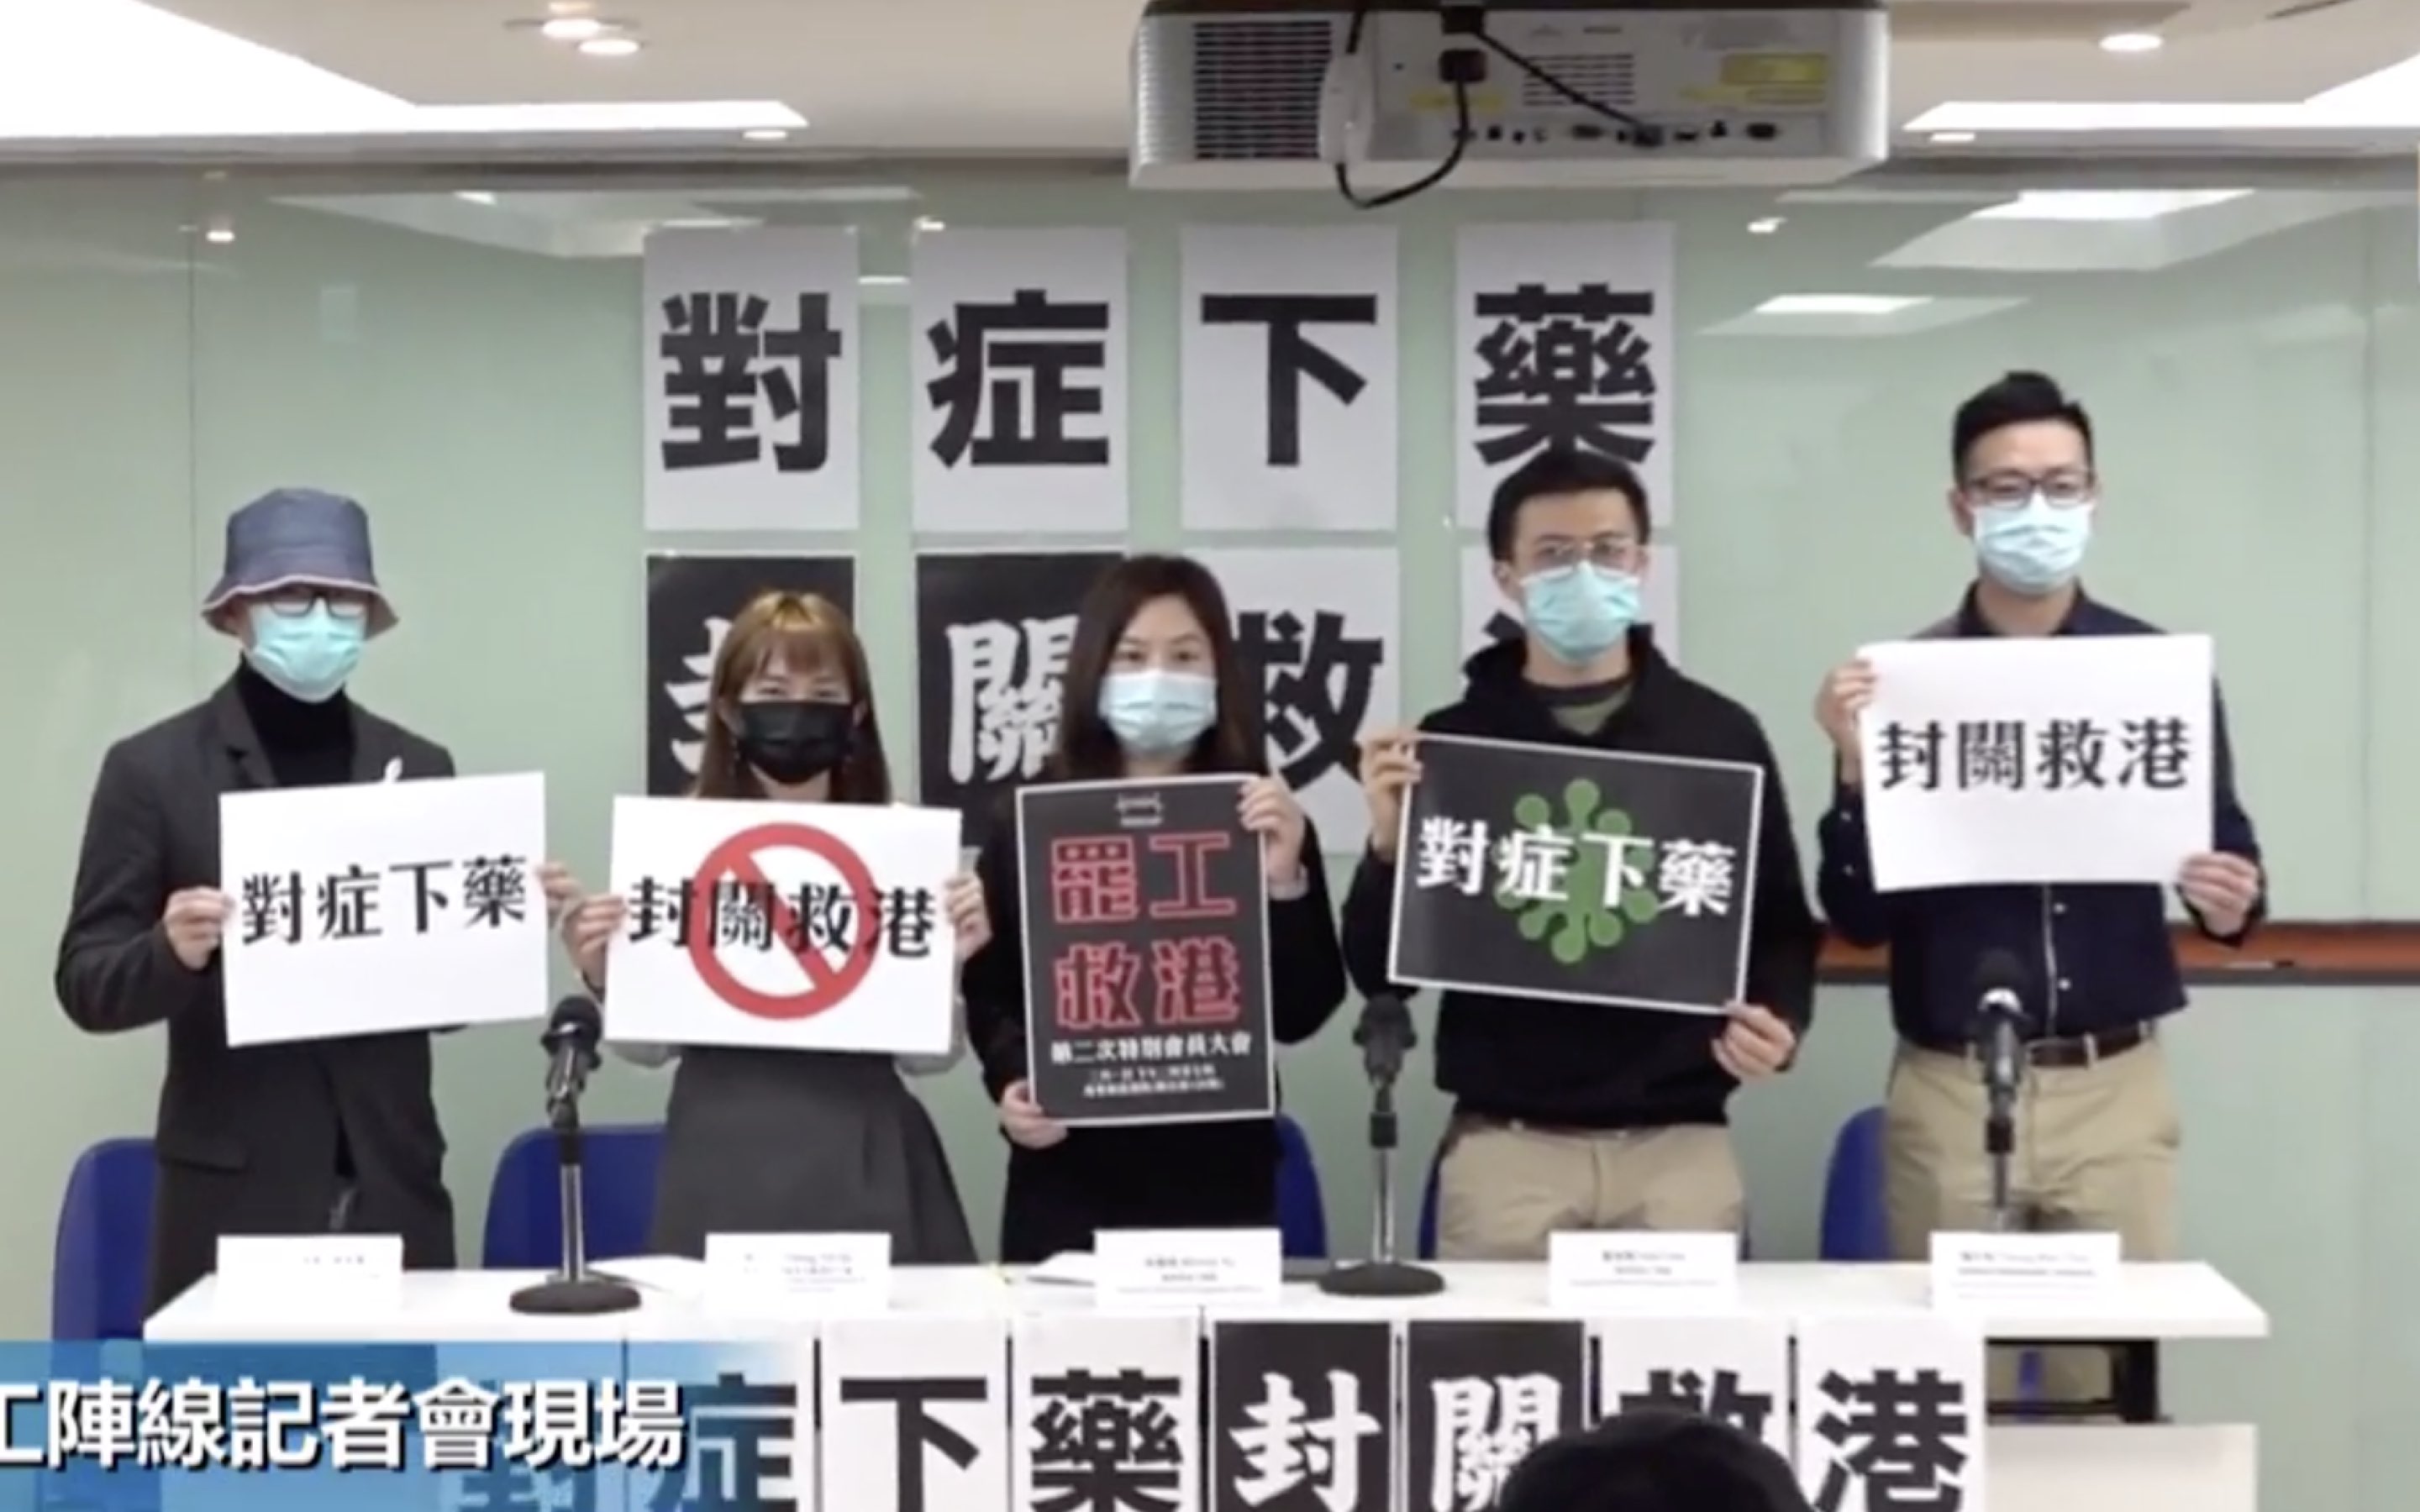 Representatives of the Hospital Authority Employees Alliance announce that they will go on strike on Monday unless the government closes borders with the mainland to stem the spread of the Wuhan coronavirus. Screengrab via Facebook video.